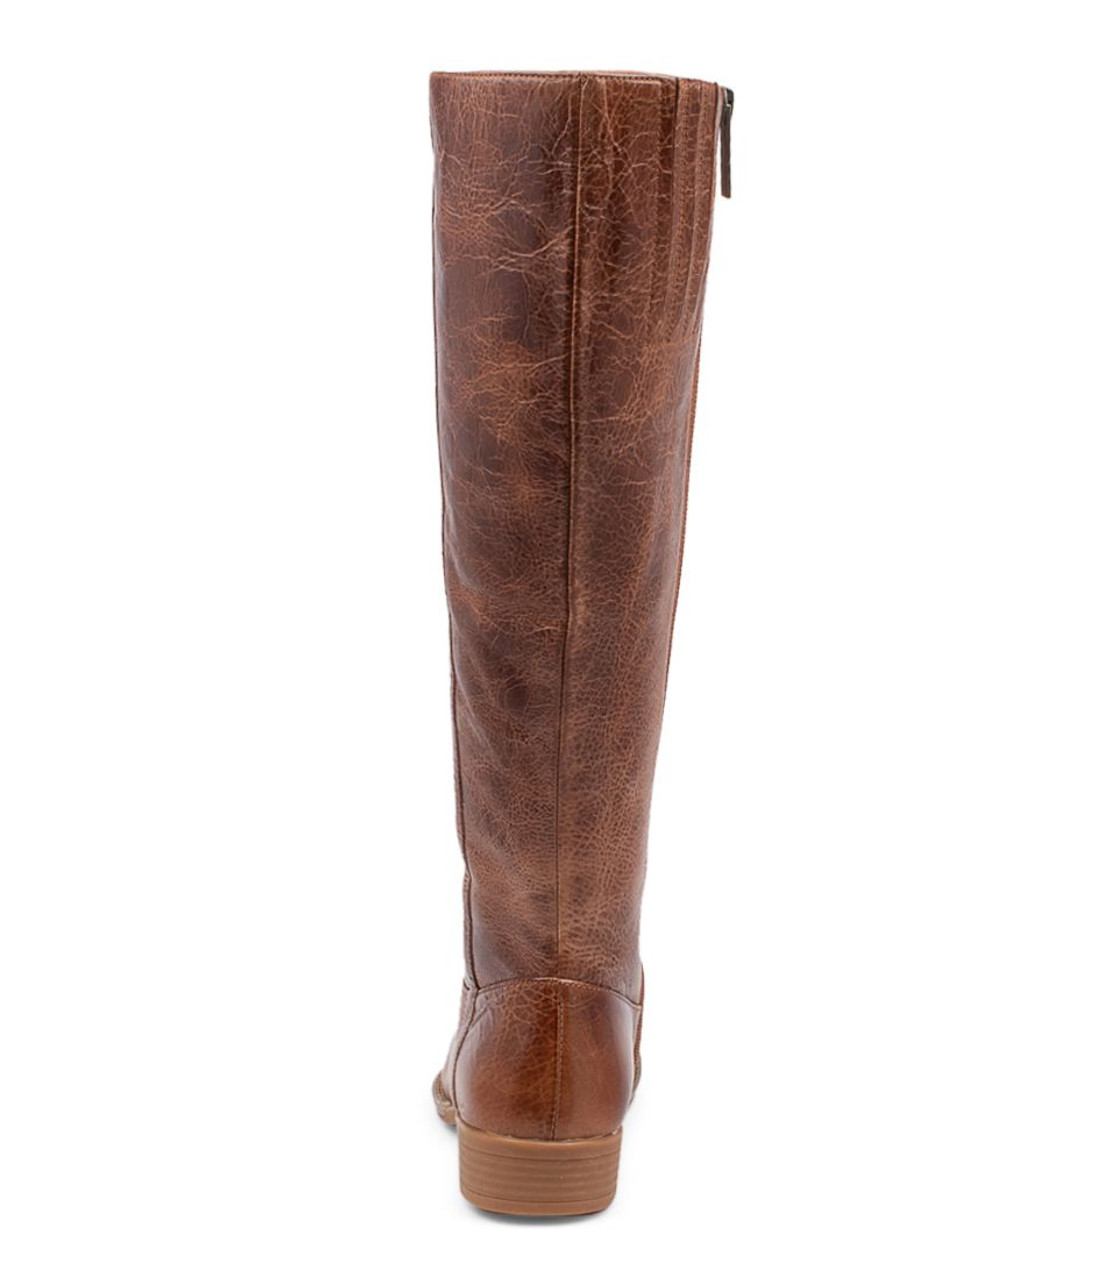 Piecy Nutmeg Leather Knee High Boots - Django and Juliette